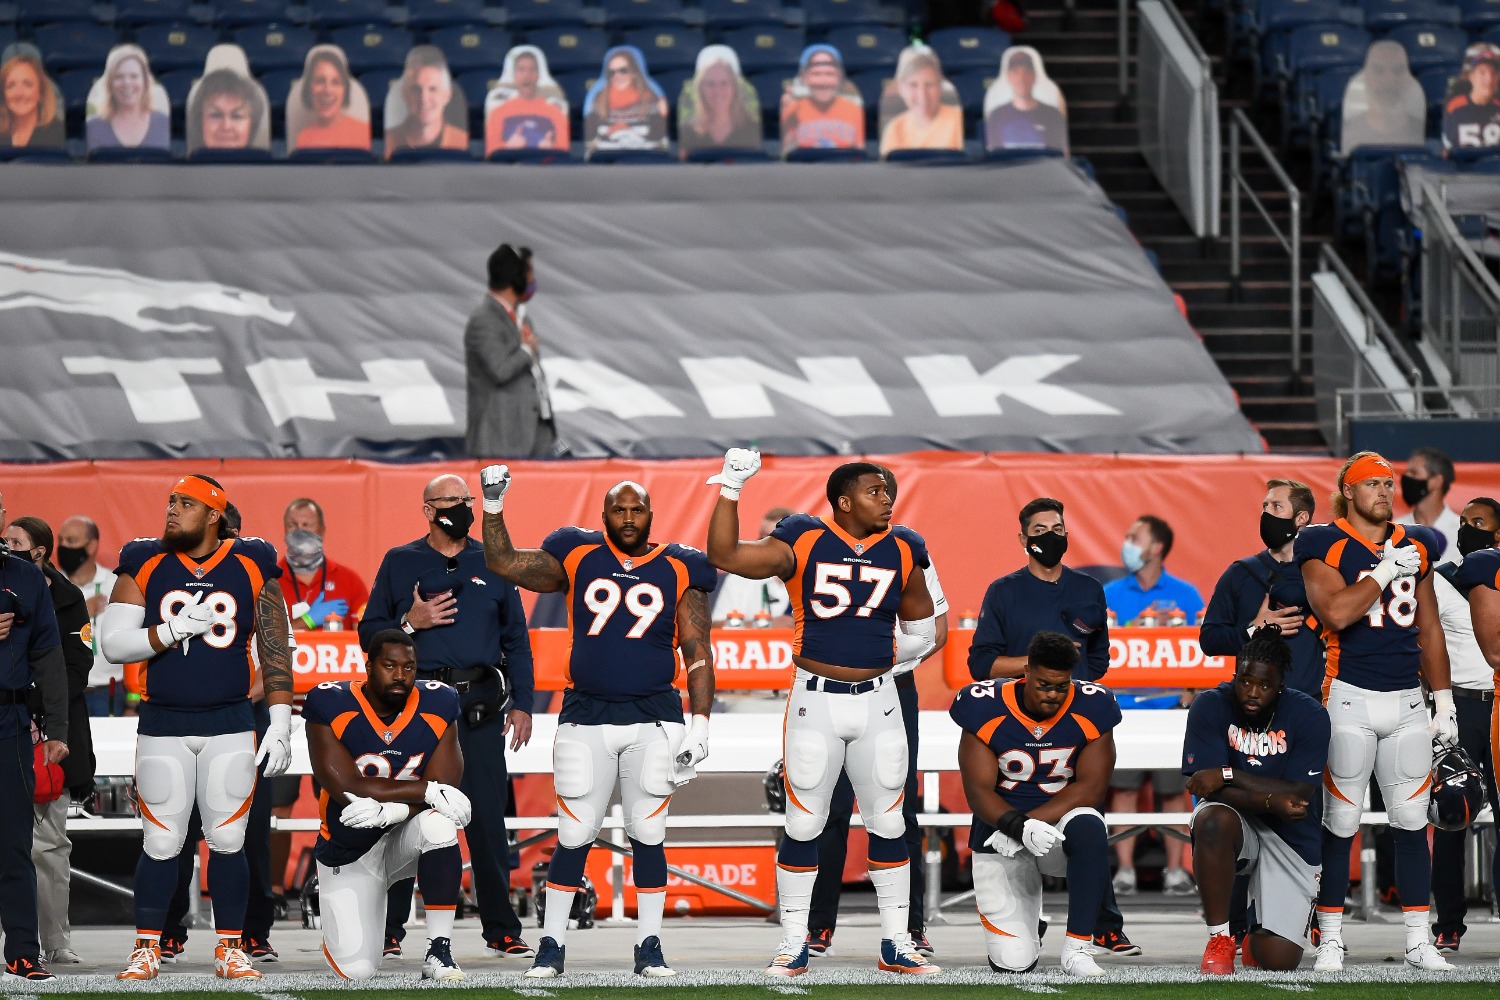 Donald Trump sent a crystal clear message to NFL players who have been protesting the national anthem.